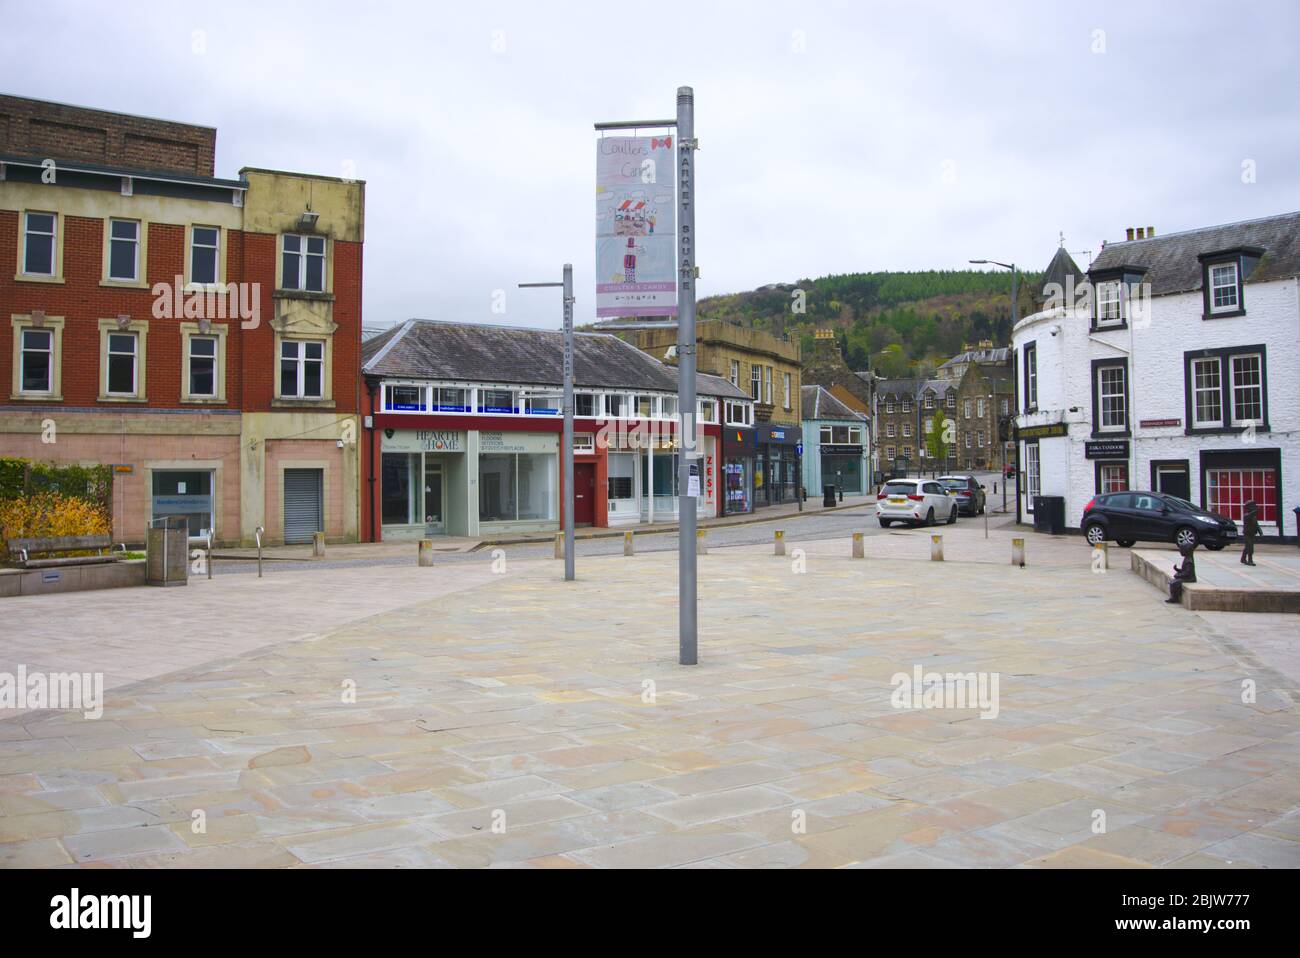 Normally busy Market Square in Galashiels, Scottish Borders, deserted due to UK Covid-19 coronavirus lockdown policy Stock Photo